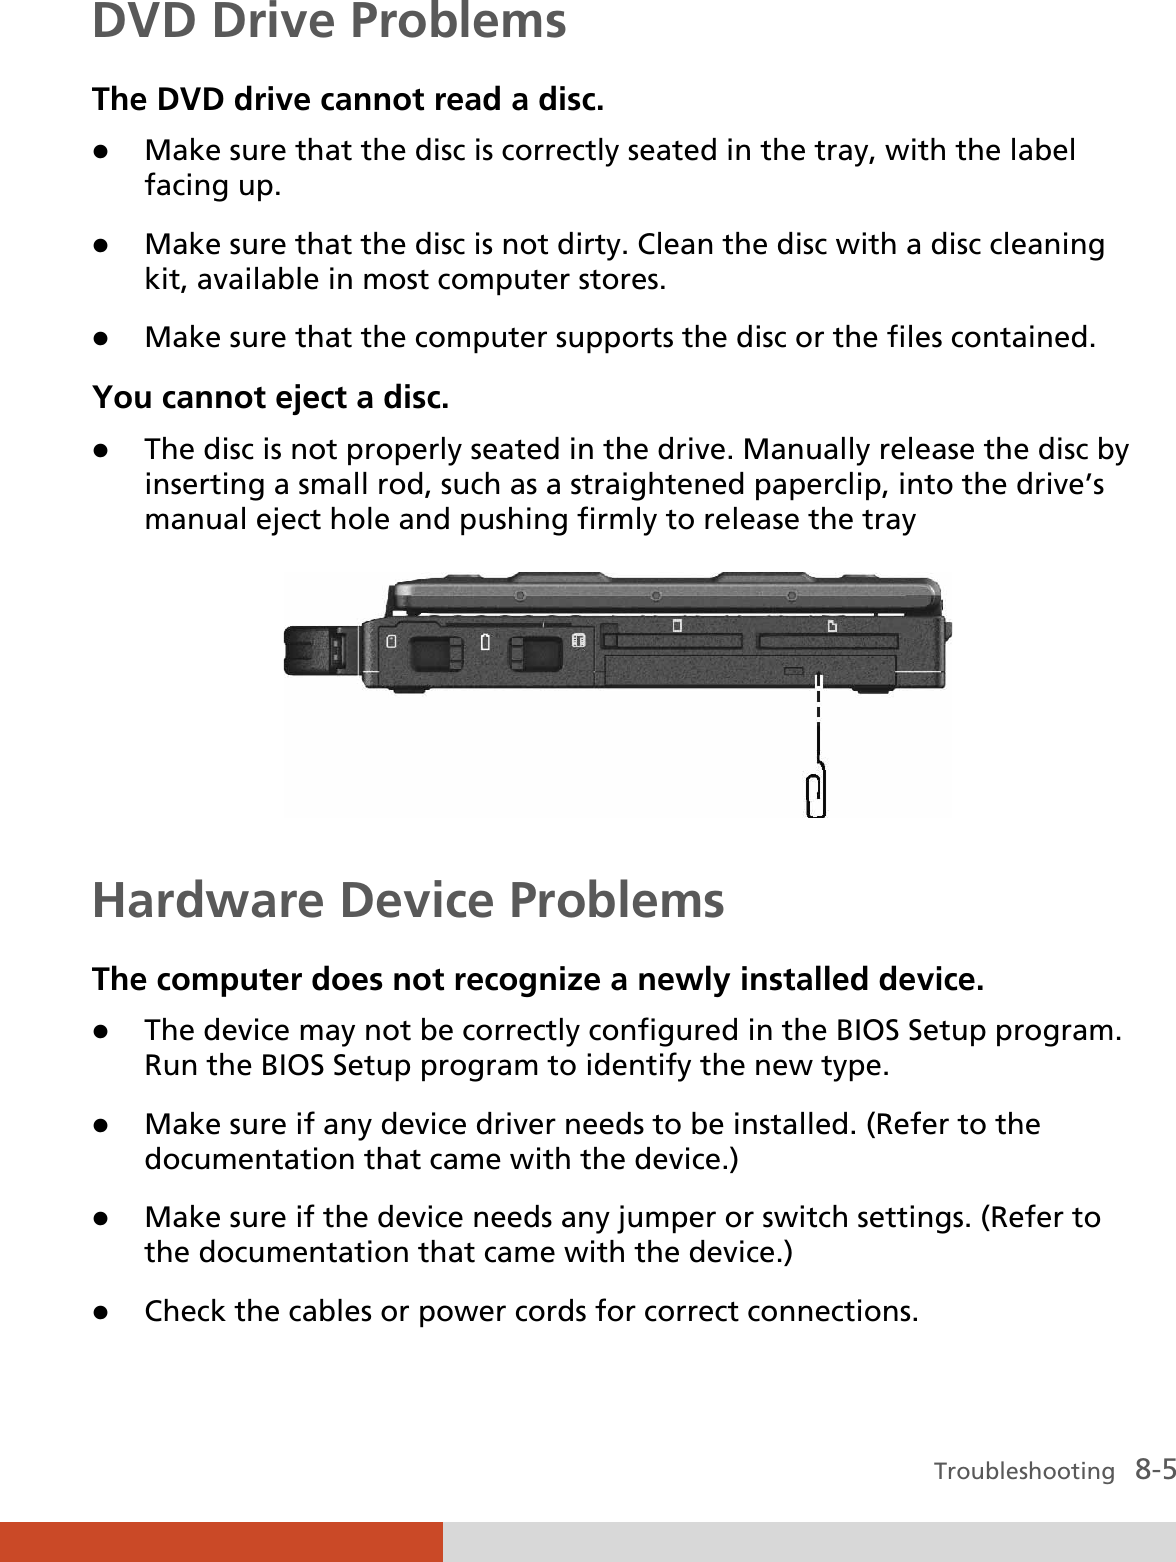  Troubleshooting   8-5 DVD Drive Problems The DVD drive cannot read a disc. z Make sure that the disc is correctly seated in the tray, with the label facing up. z Make sure that the disc is not dirty. Clean the disc with a disc cleaning kit, available in most computer stores. z Make sure that the computer supports the disc or the files contained. You cannot eject a disc. z The disc is not properly seated in the drive. Manually release the disc by inserting a small rod, such as a straightened paperclip, into the drive’s manual eject hole and pushing firmly to release the tray  Hardware Device Problems The computer does not recognize a newly installed device. z The device may not be correctly configured in the BIOS Setup program. Run the BIOS Setup program to identify the new type. z Make sure if any device driver needs to be installed. (Refer to the documentation that came with the device.) z Make sure if the device needs any jumper or switch settings. (Refer to the documentation that came with the device.) z Check the cables or power cords for correct connections. 